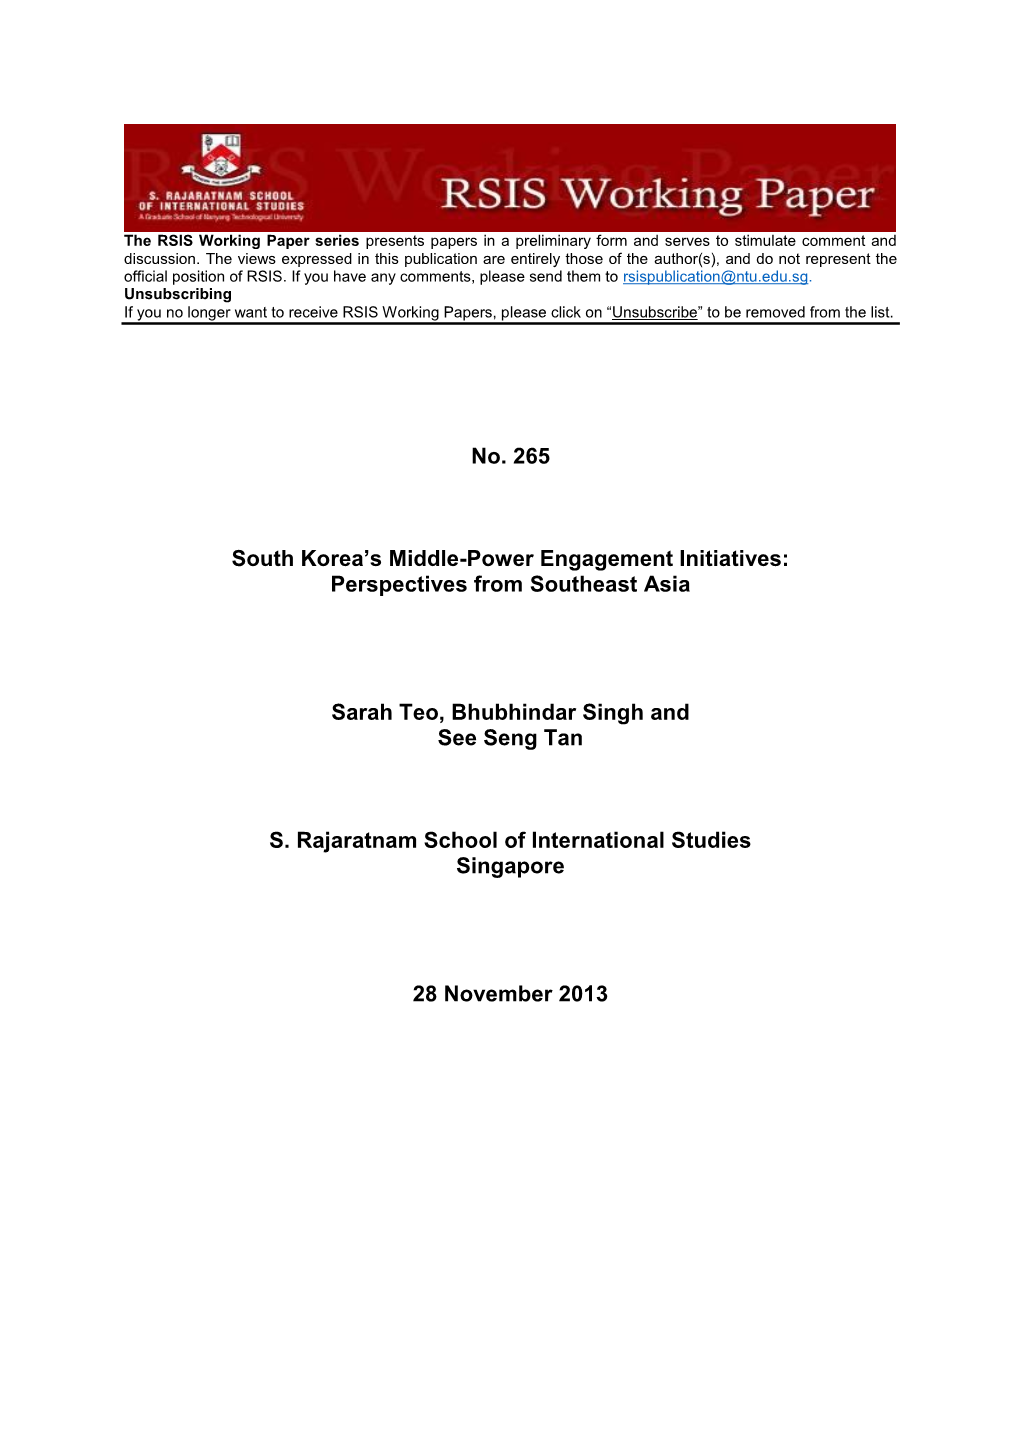 South Korea's Middle-Power Engagement Initiatives: Perspectives from Southeast Asia